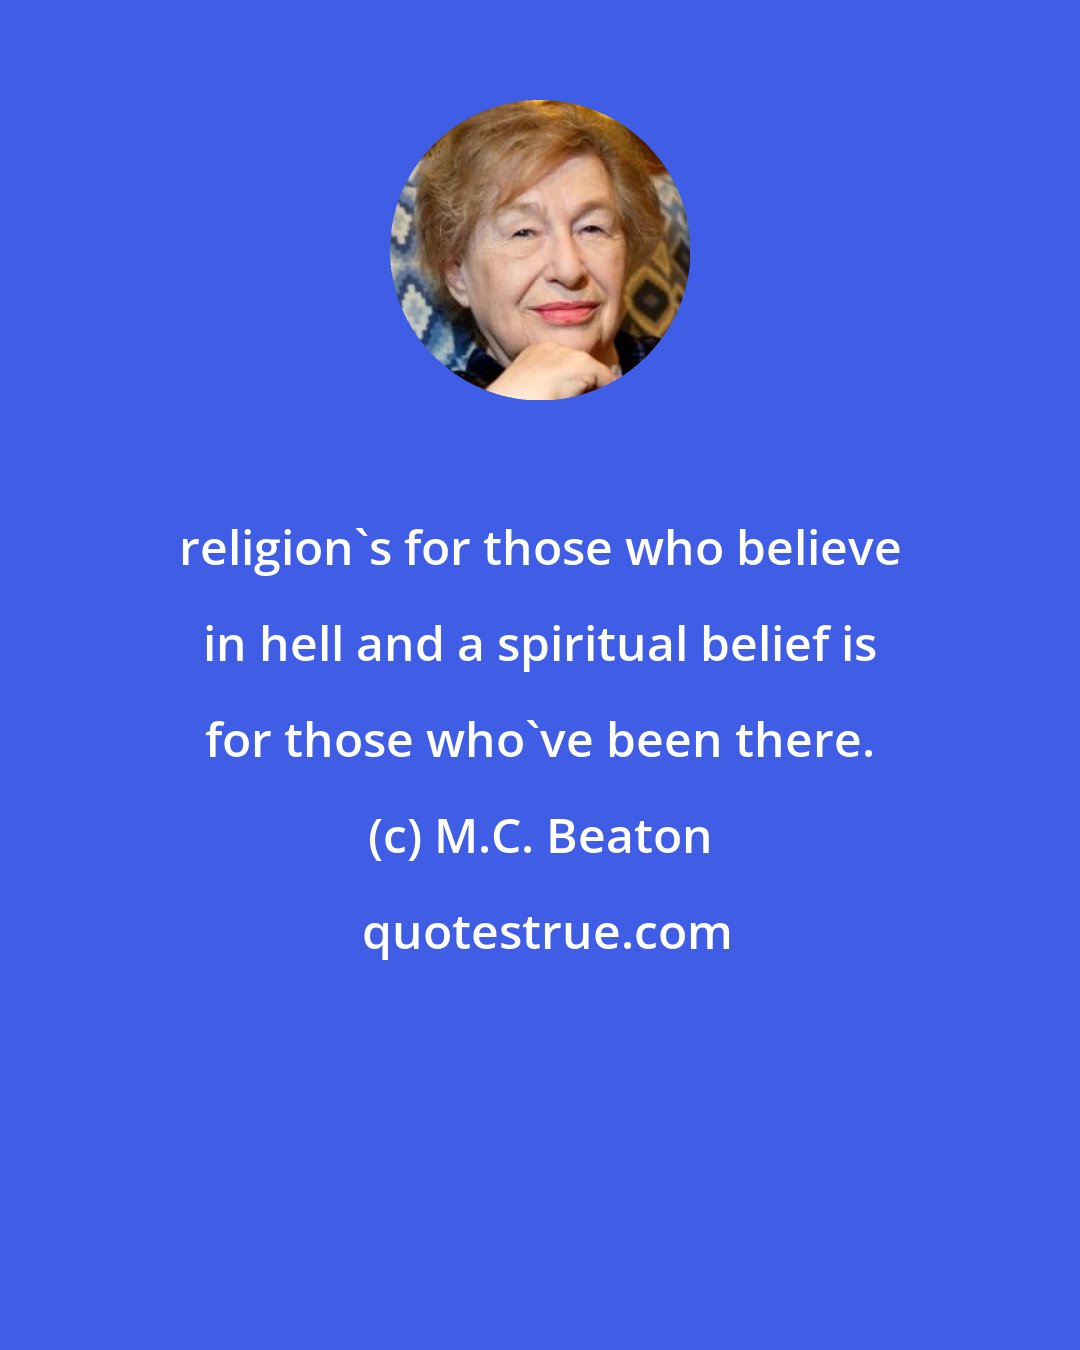 M.C. Beaton: religion's for those who believe in hell and a spiritual belief is for those who've been there.